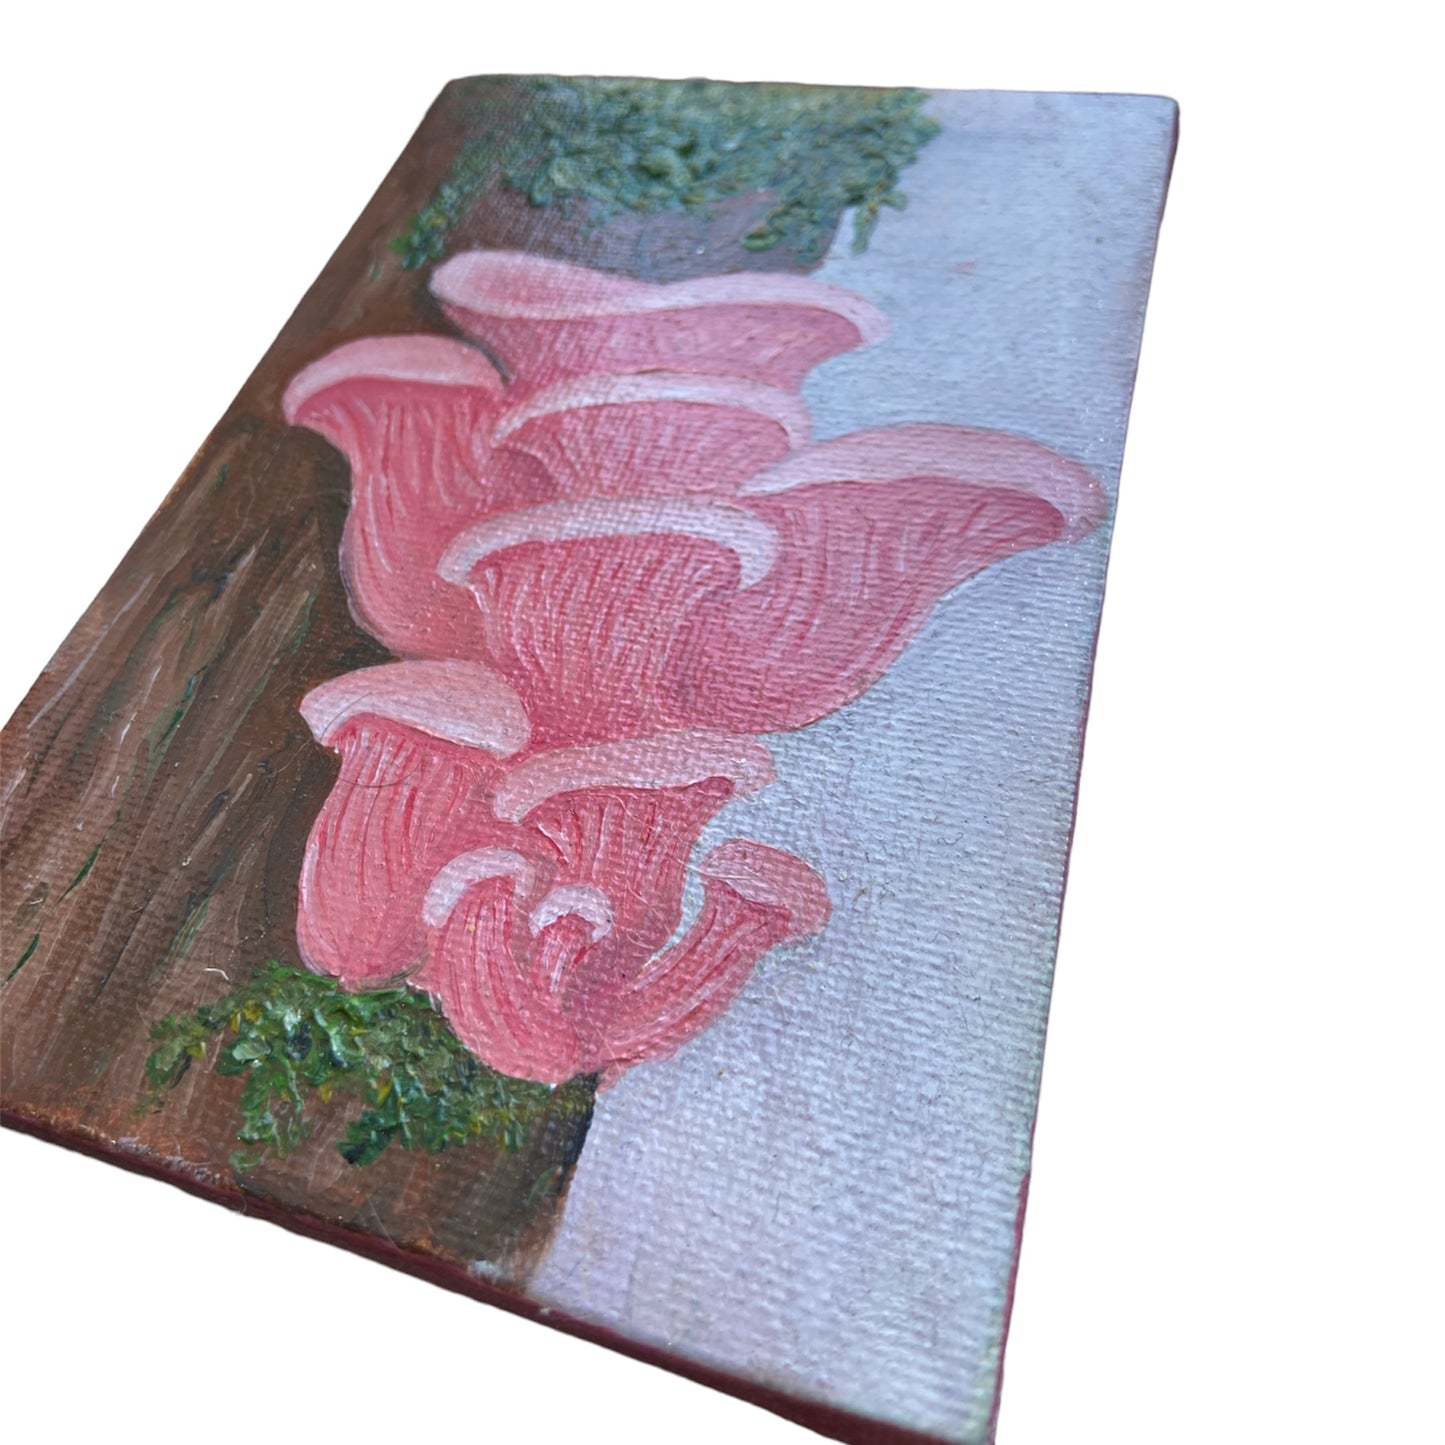 Pink Oyster Mushroom on Canvas Artwork by Paige